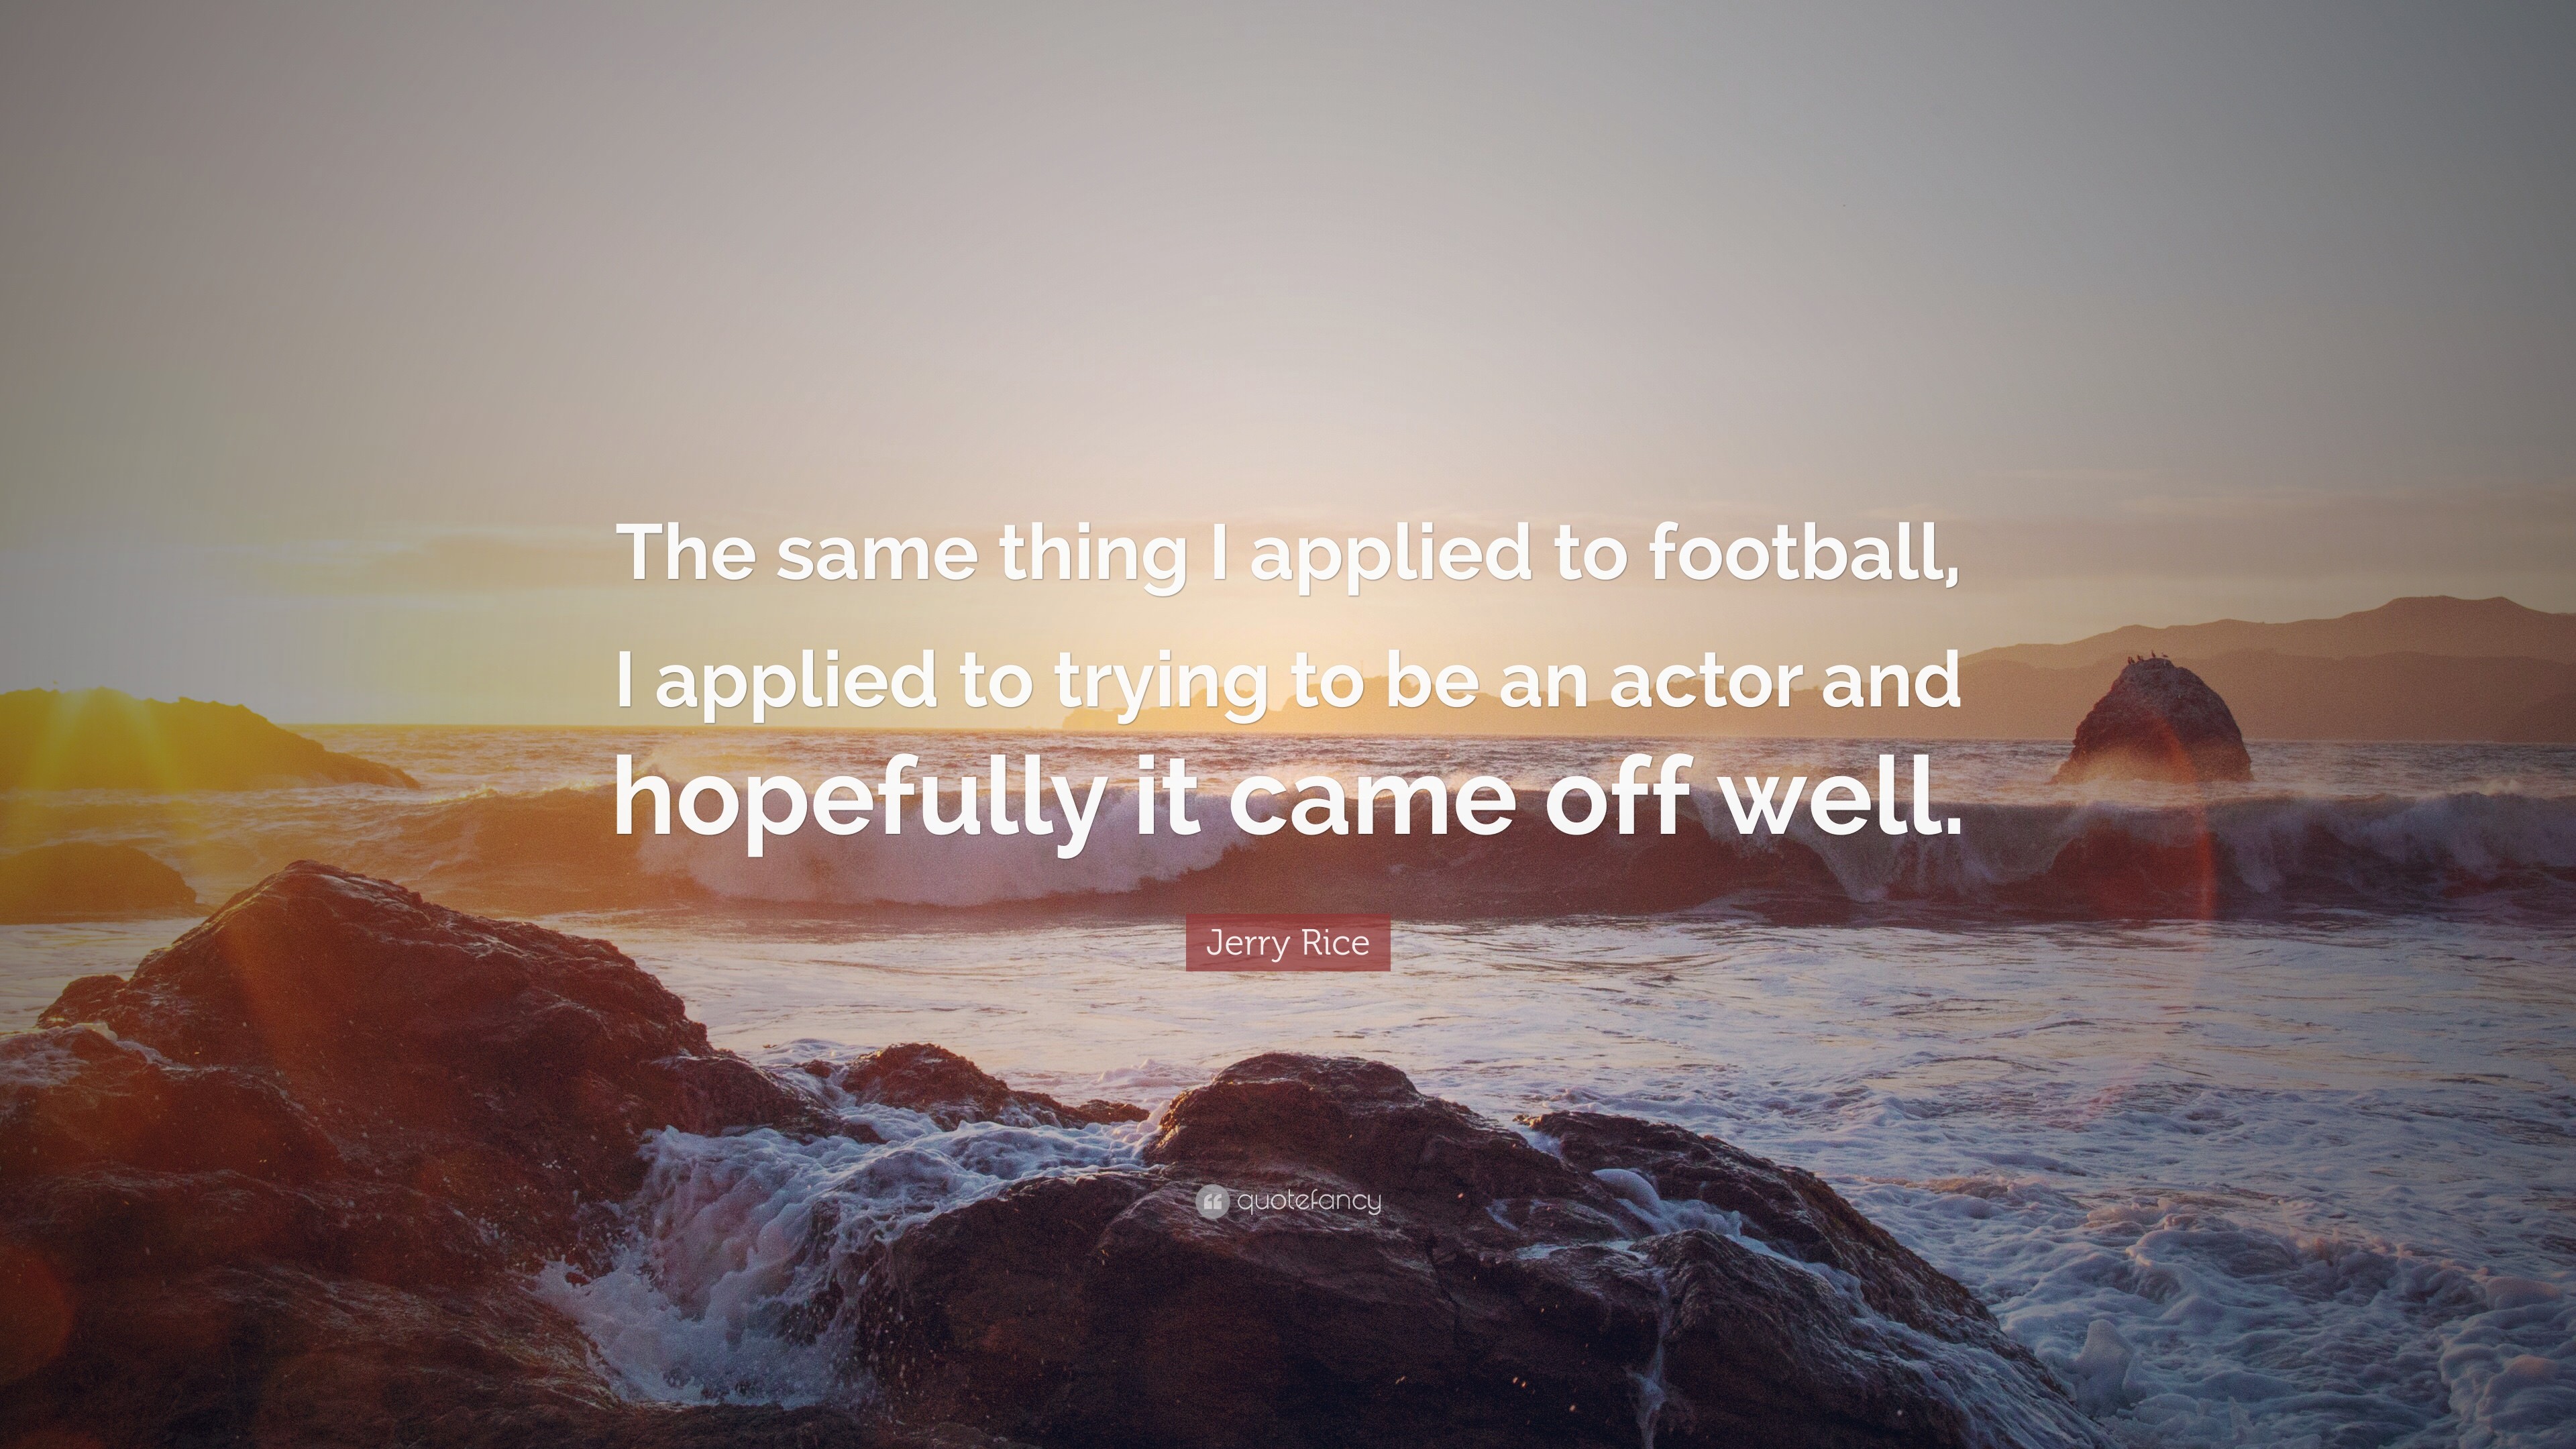 Jerry Rice Quote: “The same thing I applied to football, I applied to